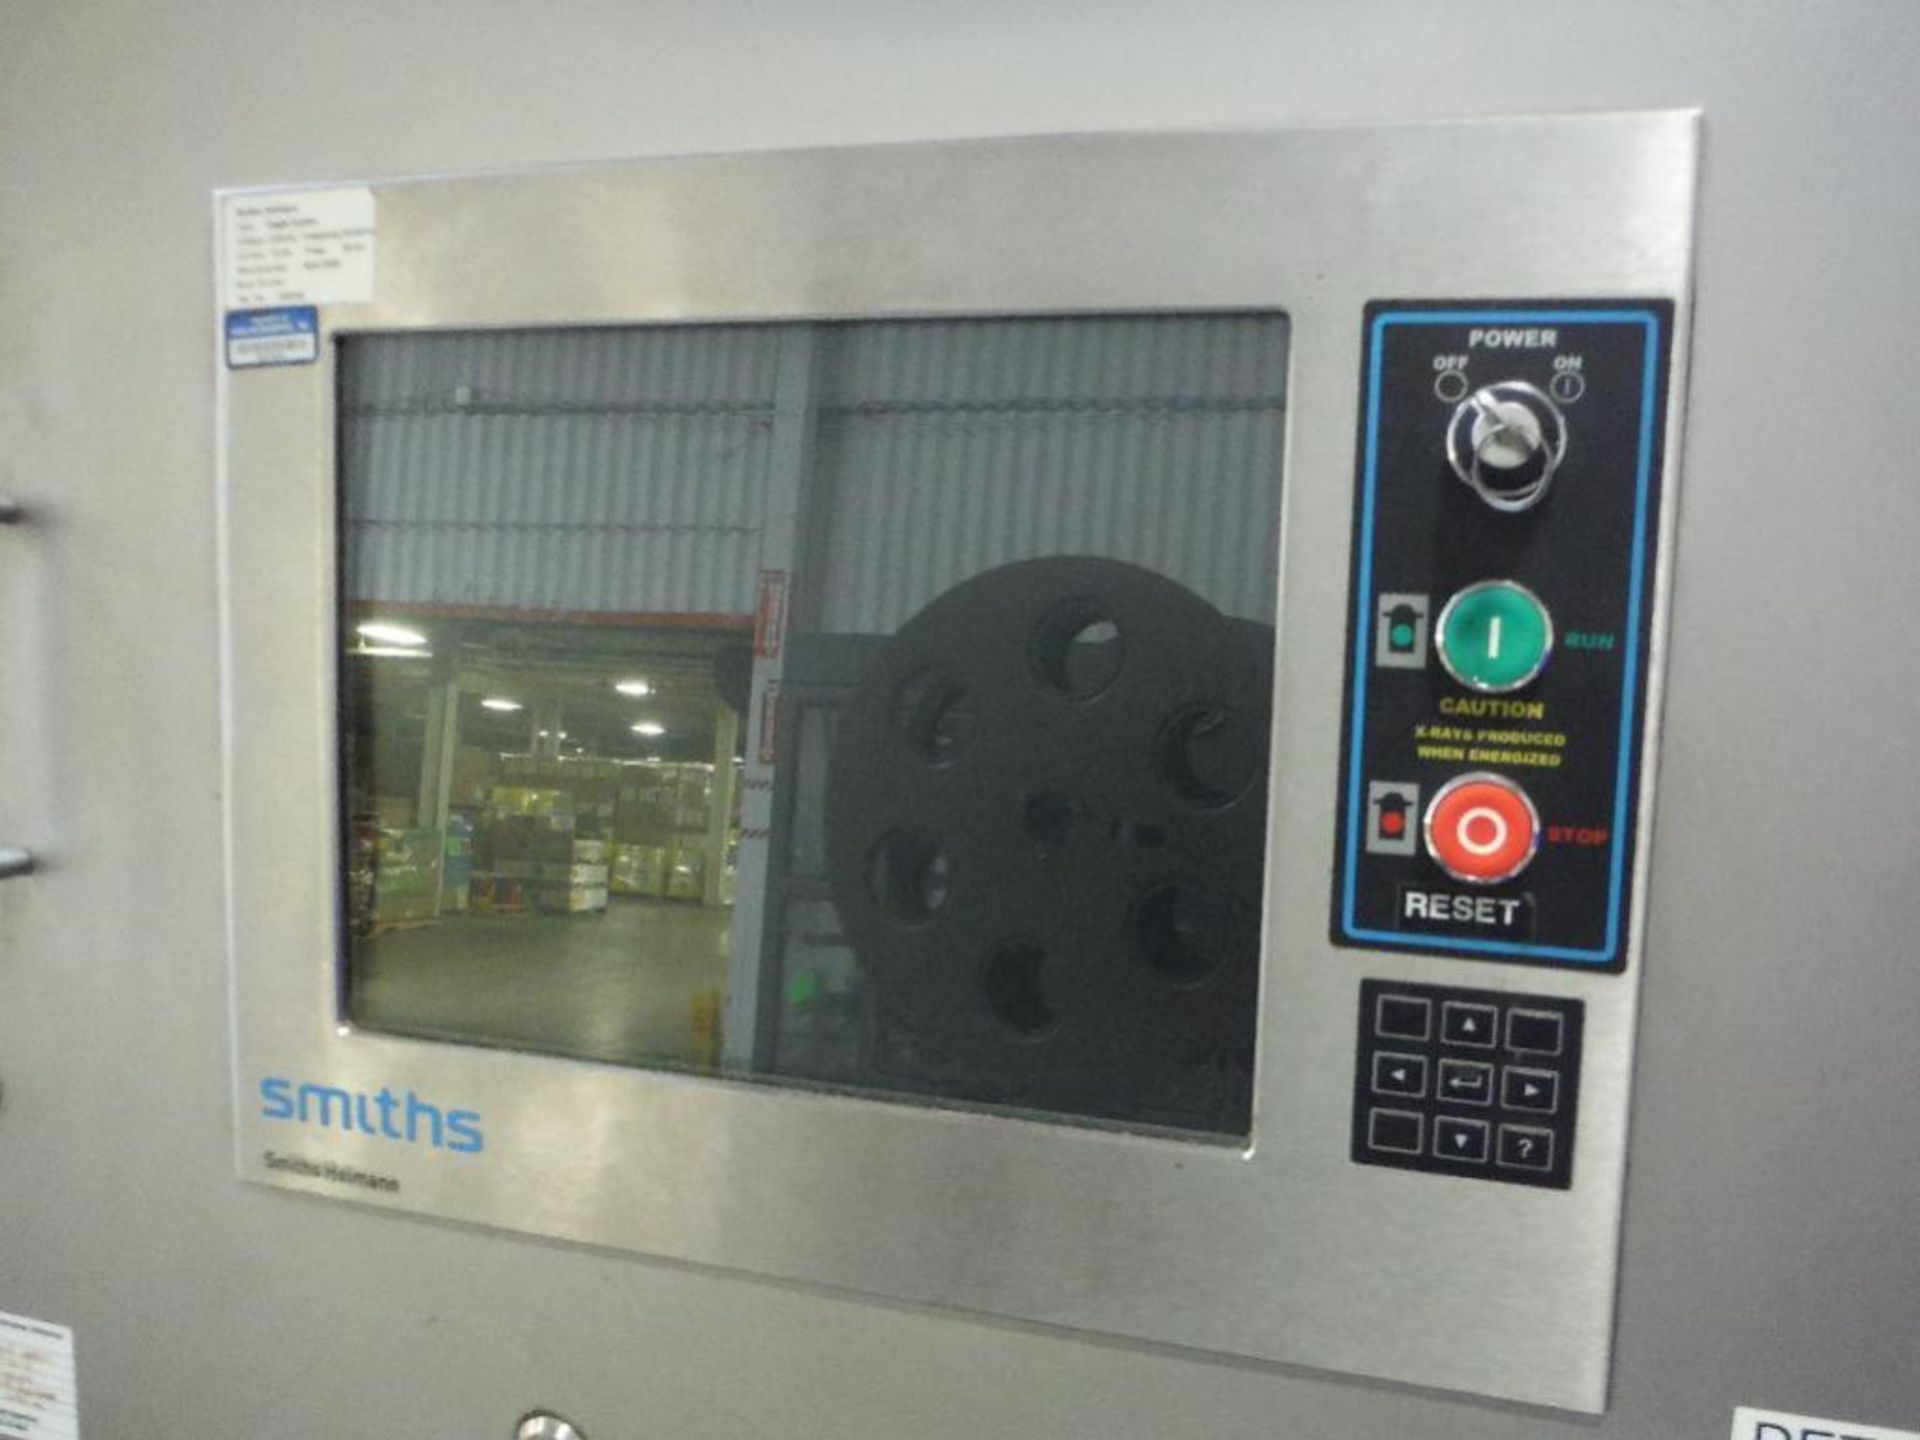 2005 Smiths x-ray machine, Model Eagle Carton, SN 100446, 25 in. wide x 16 in. tall aperture, 130 in - Image 3 of 16